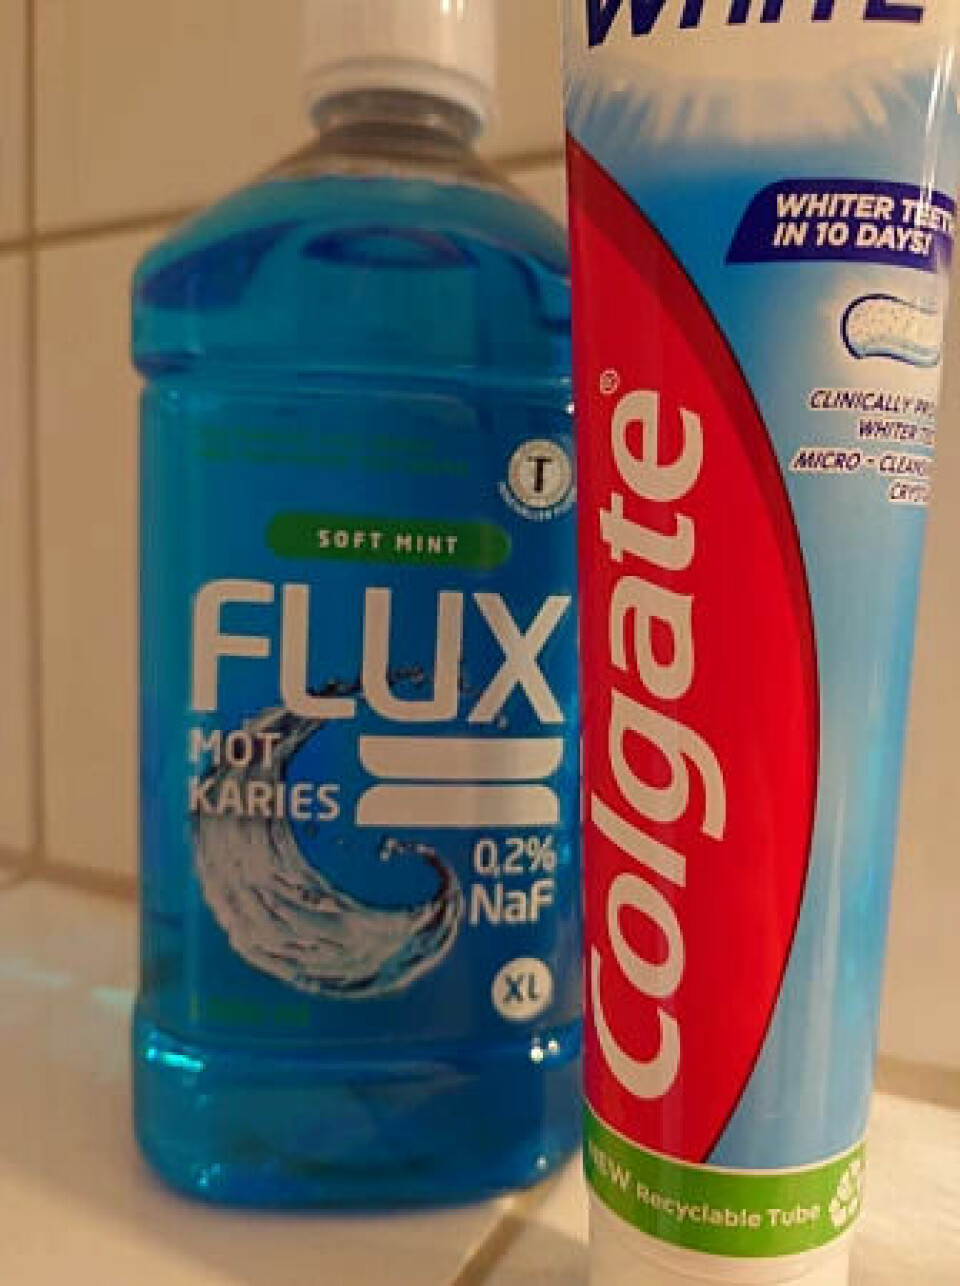 Is toothpaste enough - or should we use a fluoride mouth rinse as well?